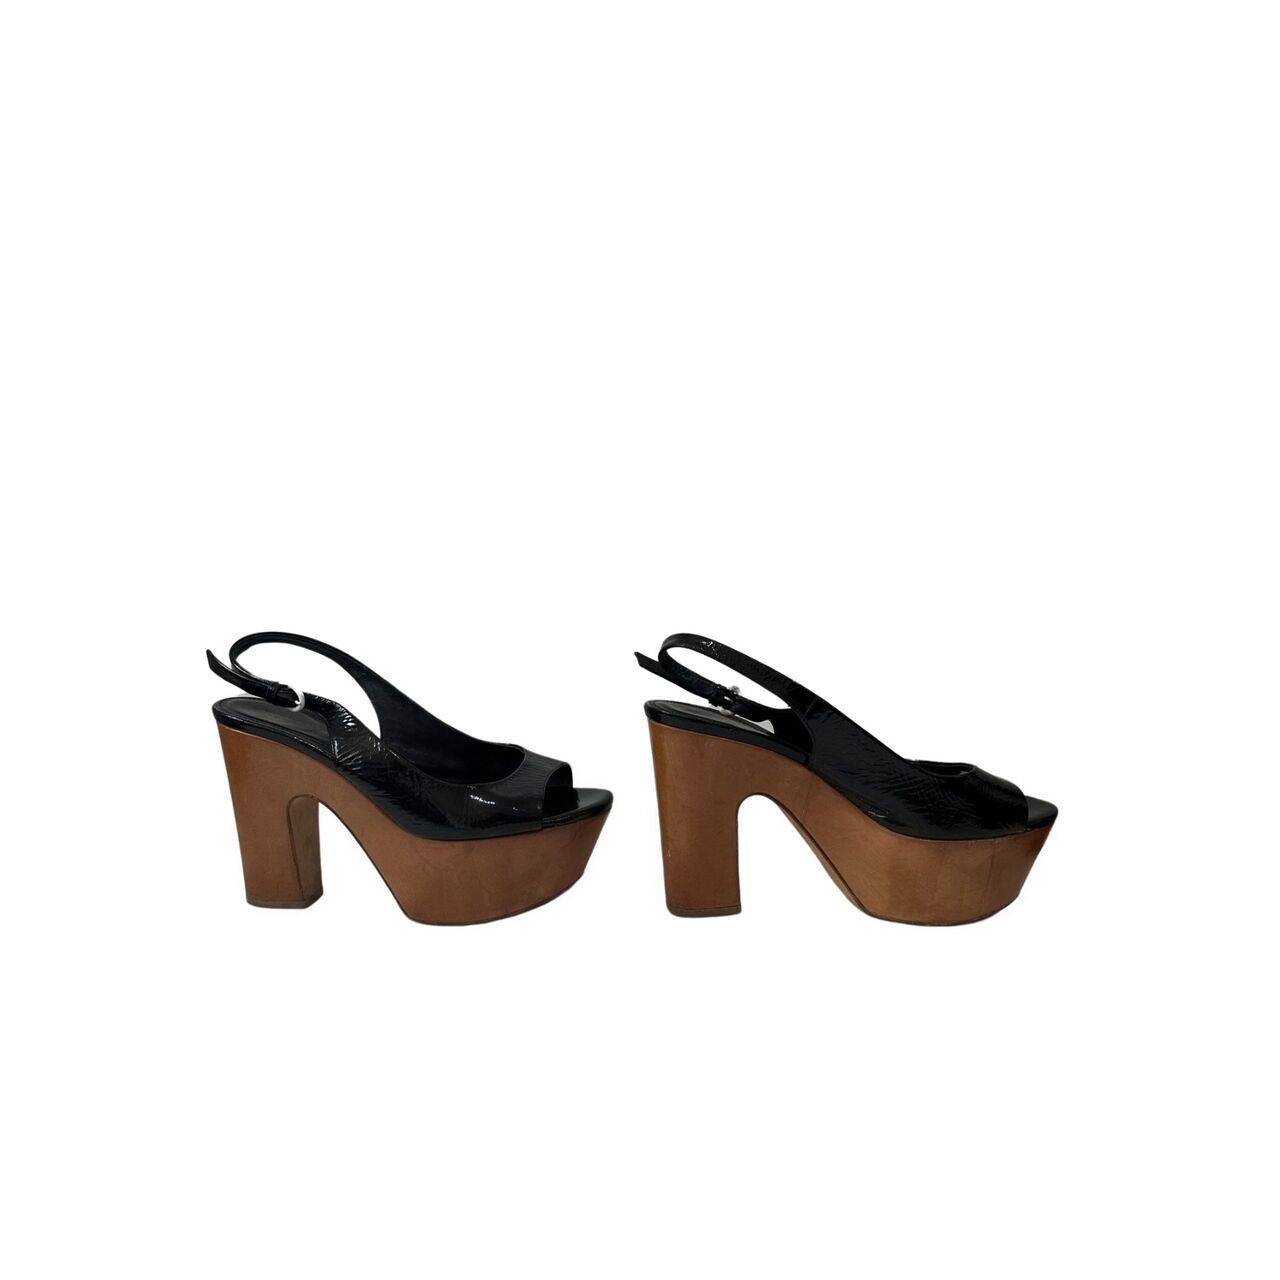 Sergio Rossi Black Wooden Clogs Slingback Sandals Wedges